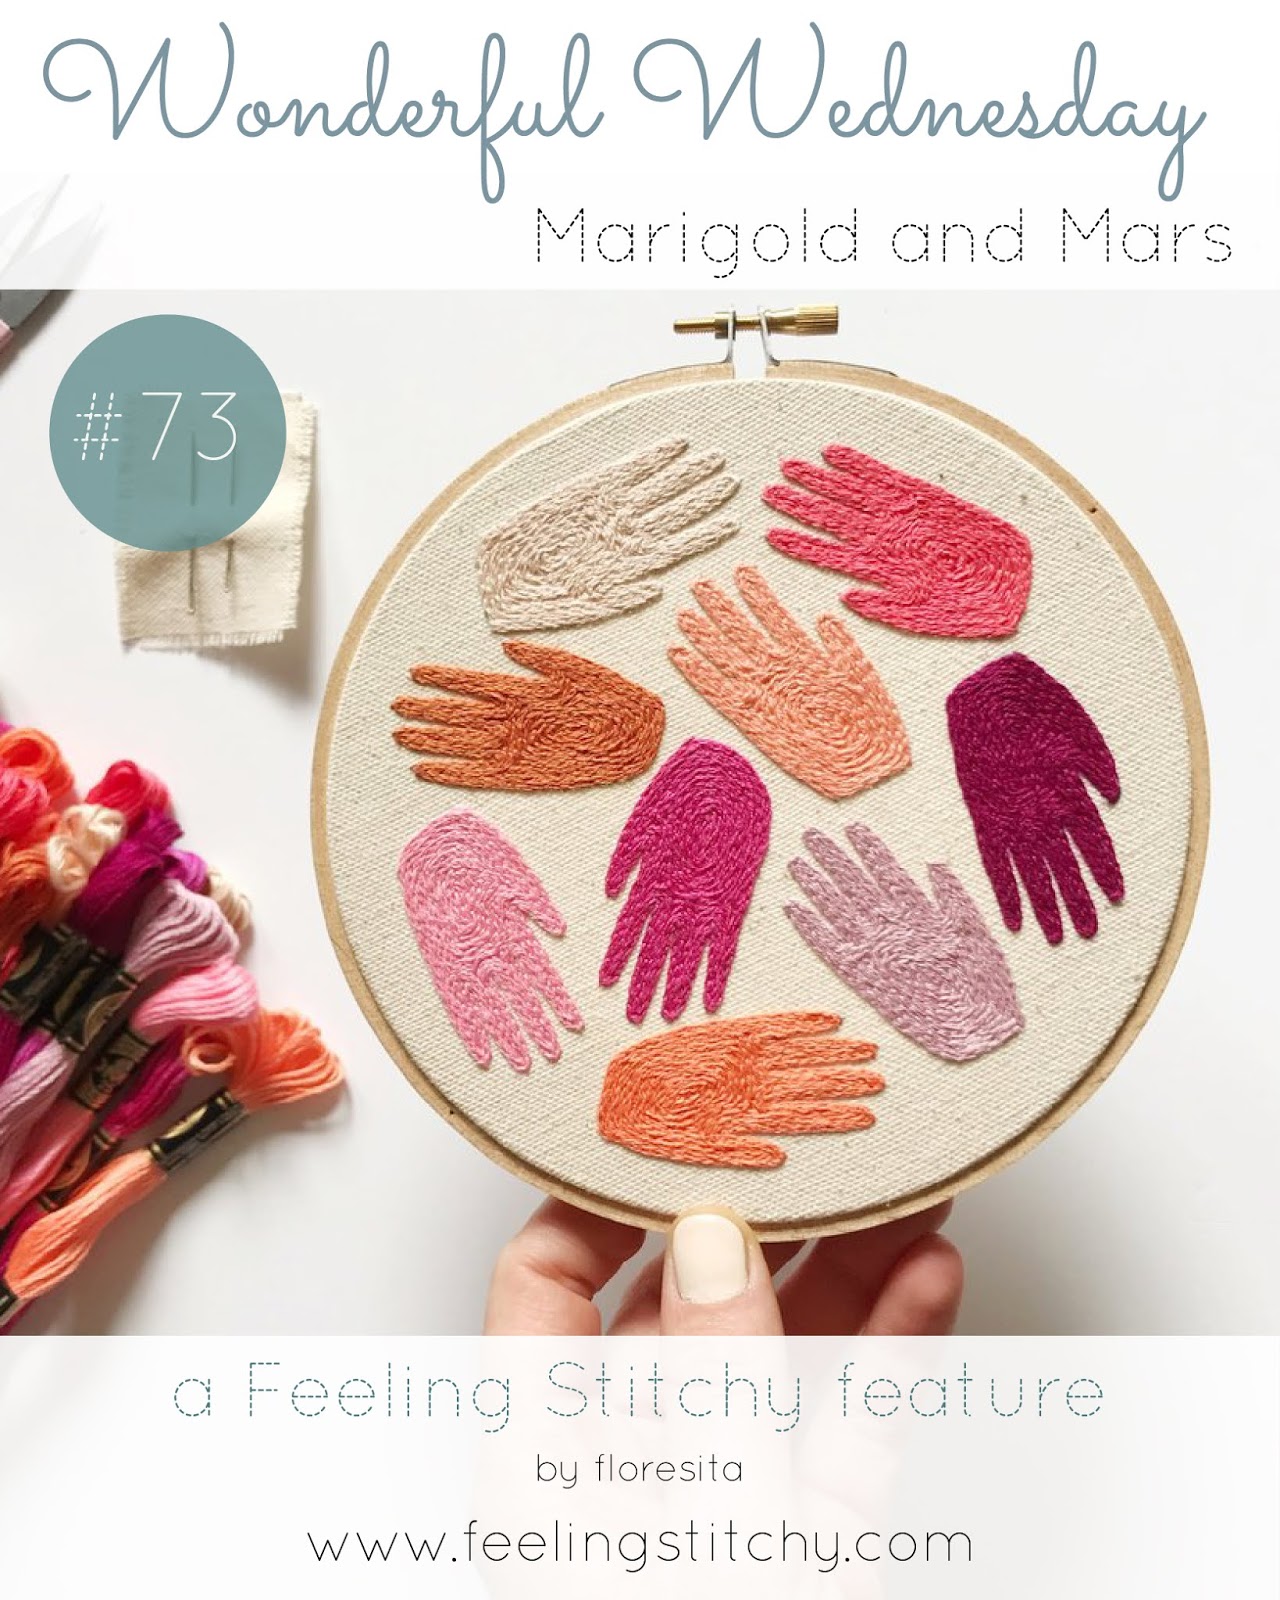 Wonderful Wednesday 73 - Marigold and Mars Hands pattern as featured by floresita on Feeling Stitchy